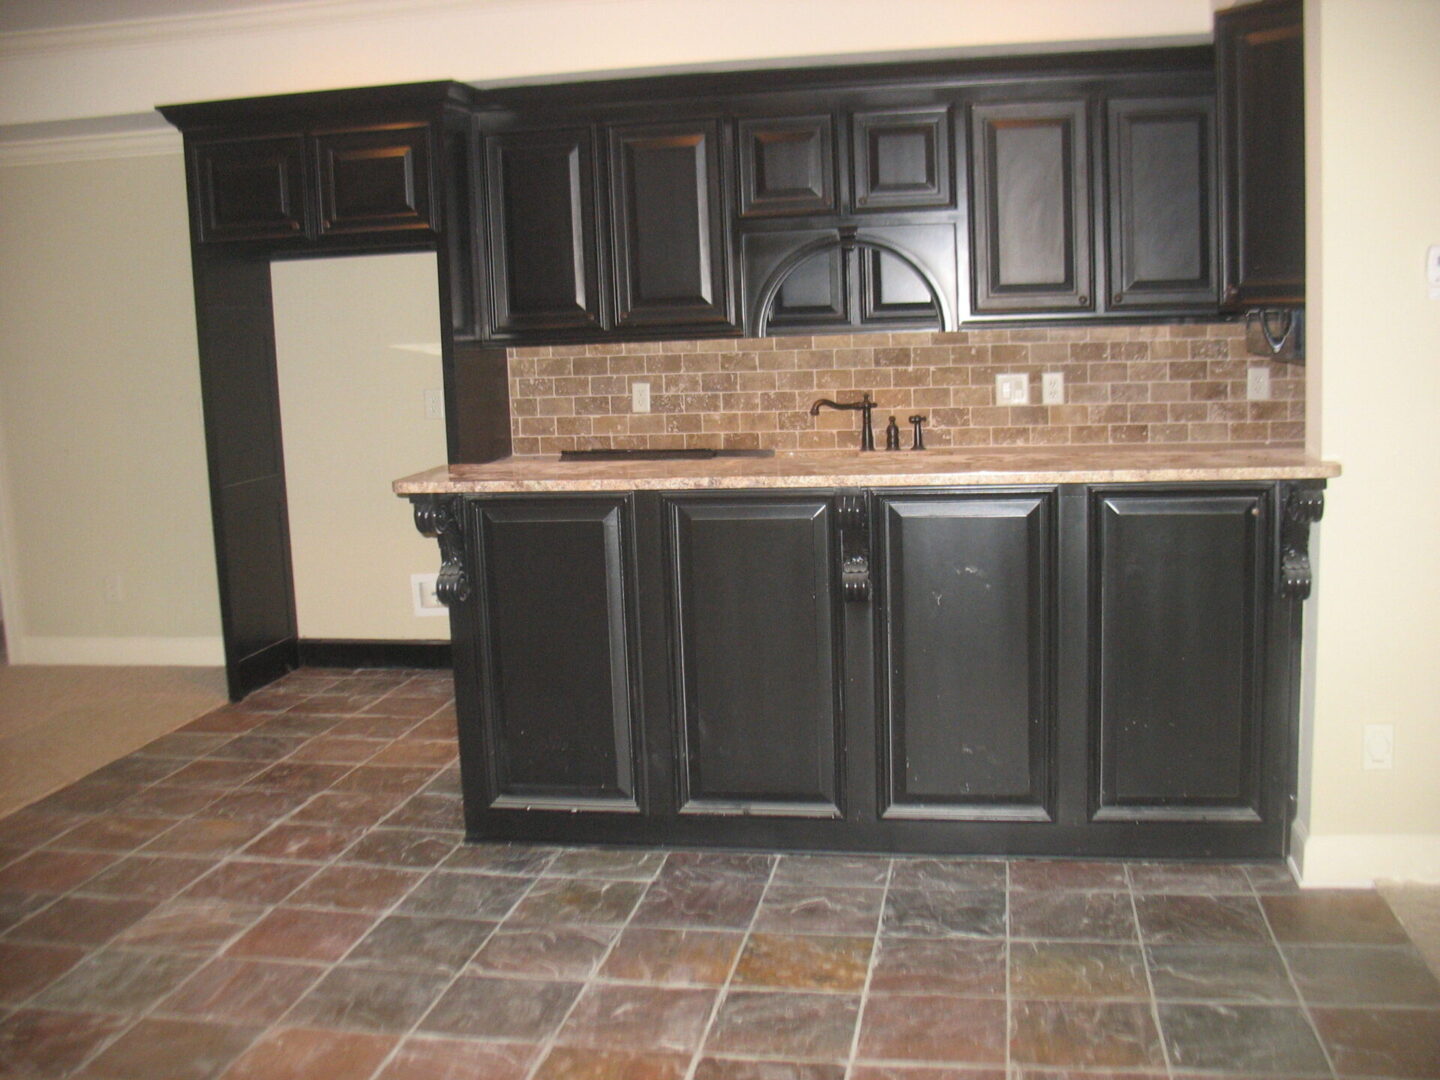 A kitchen with black cabinets and tile floor.